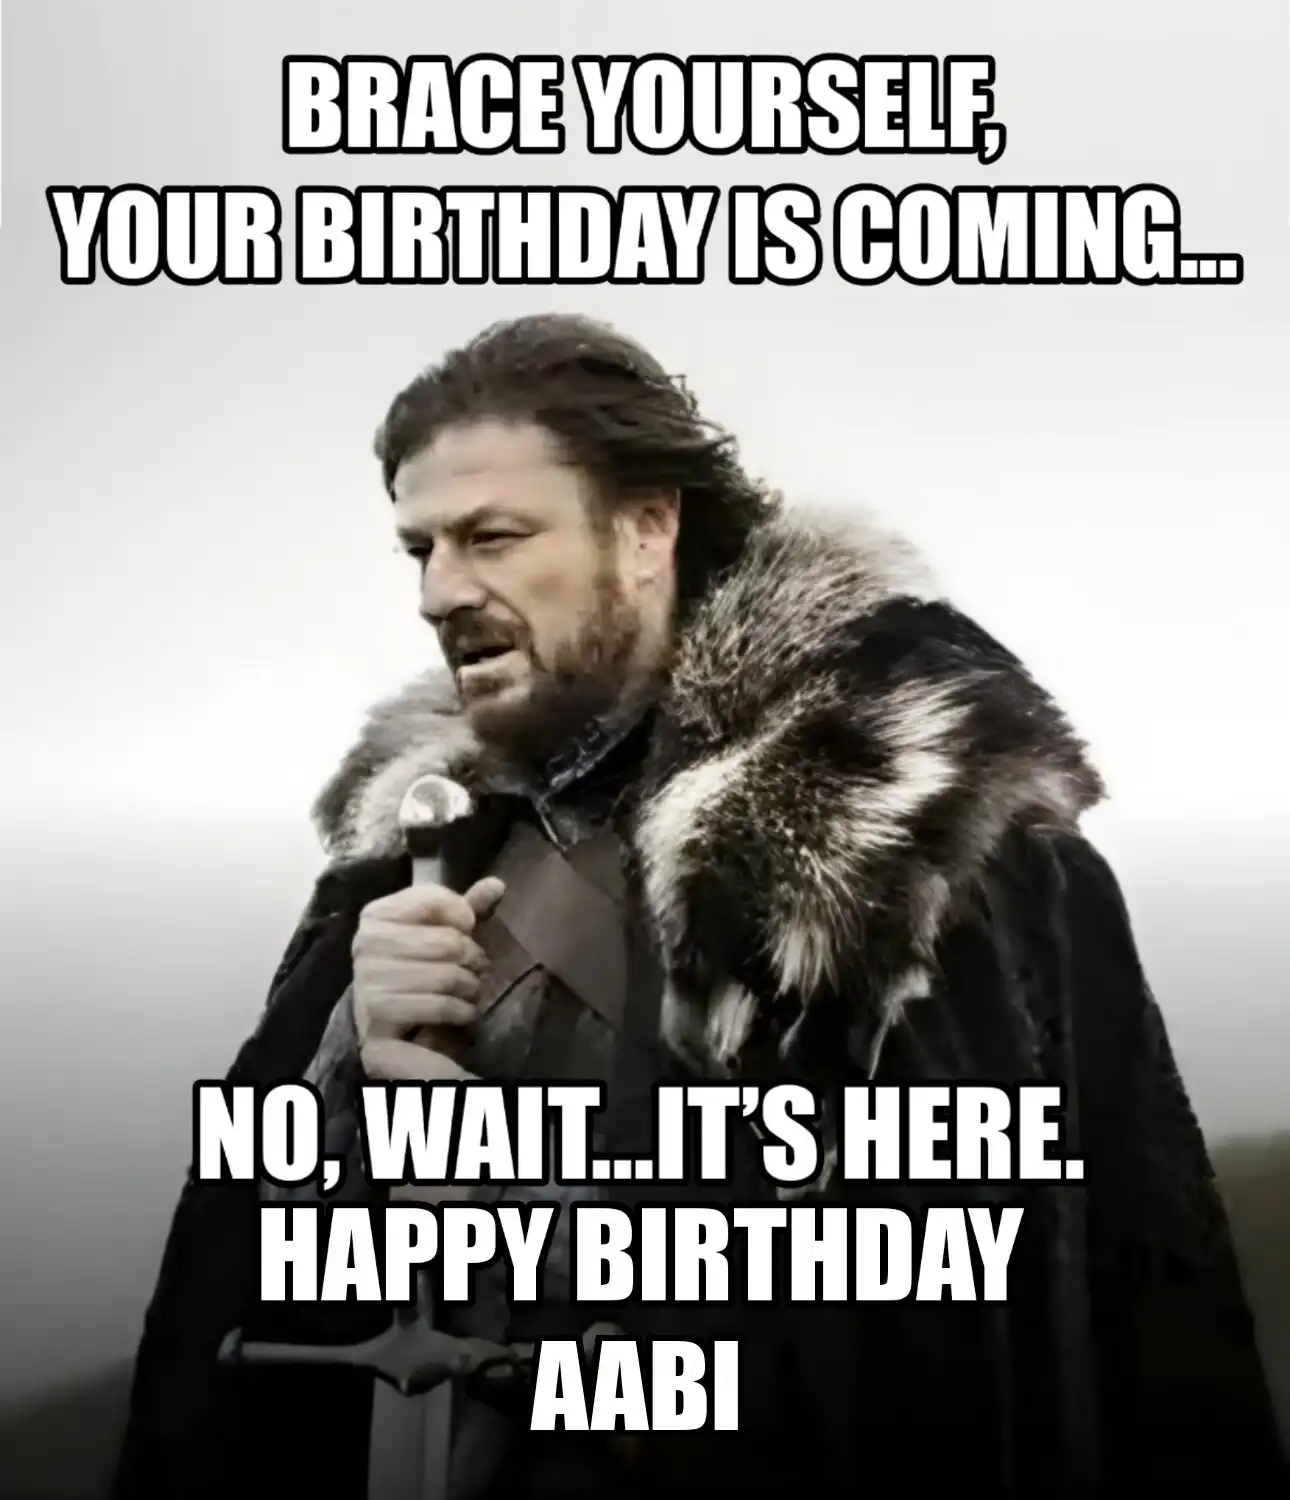 Happy Birthday Aabi Brace Yourself Your Birthday Is Coming Meme